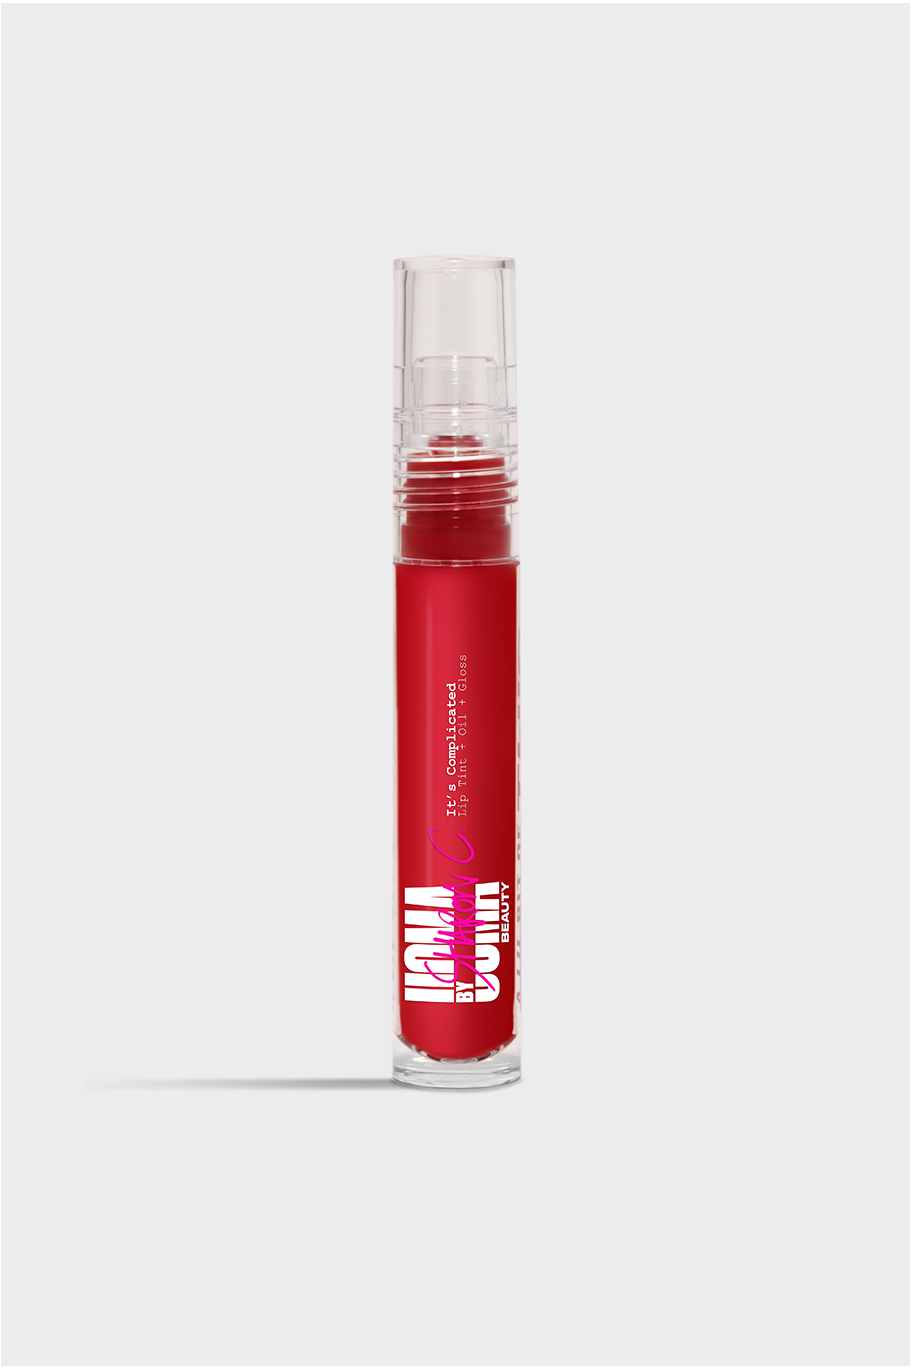 Uoma by Sharon C, It's Complicated Lip Tint + Oil + Gloss Boasty! - image 1 of 8